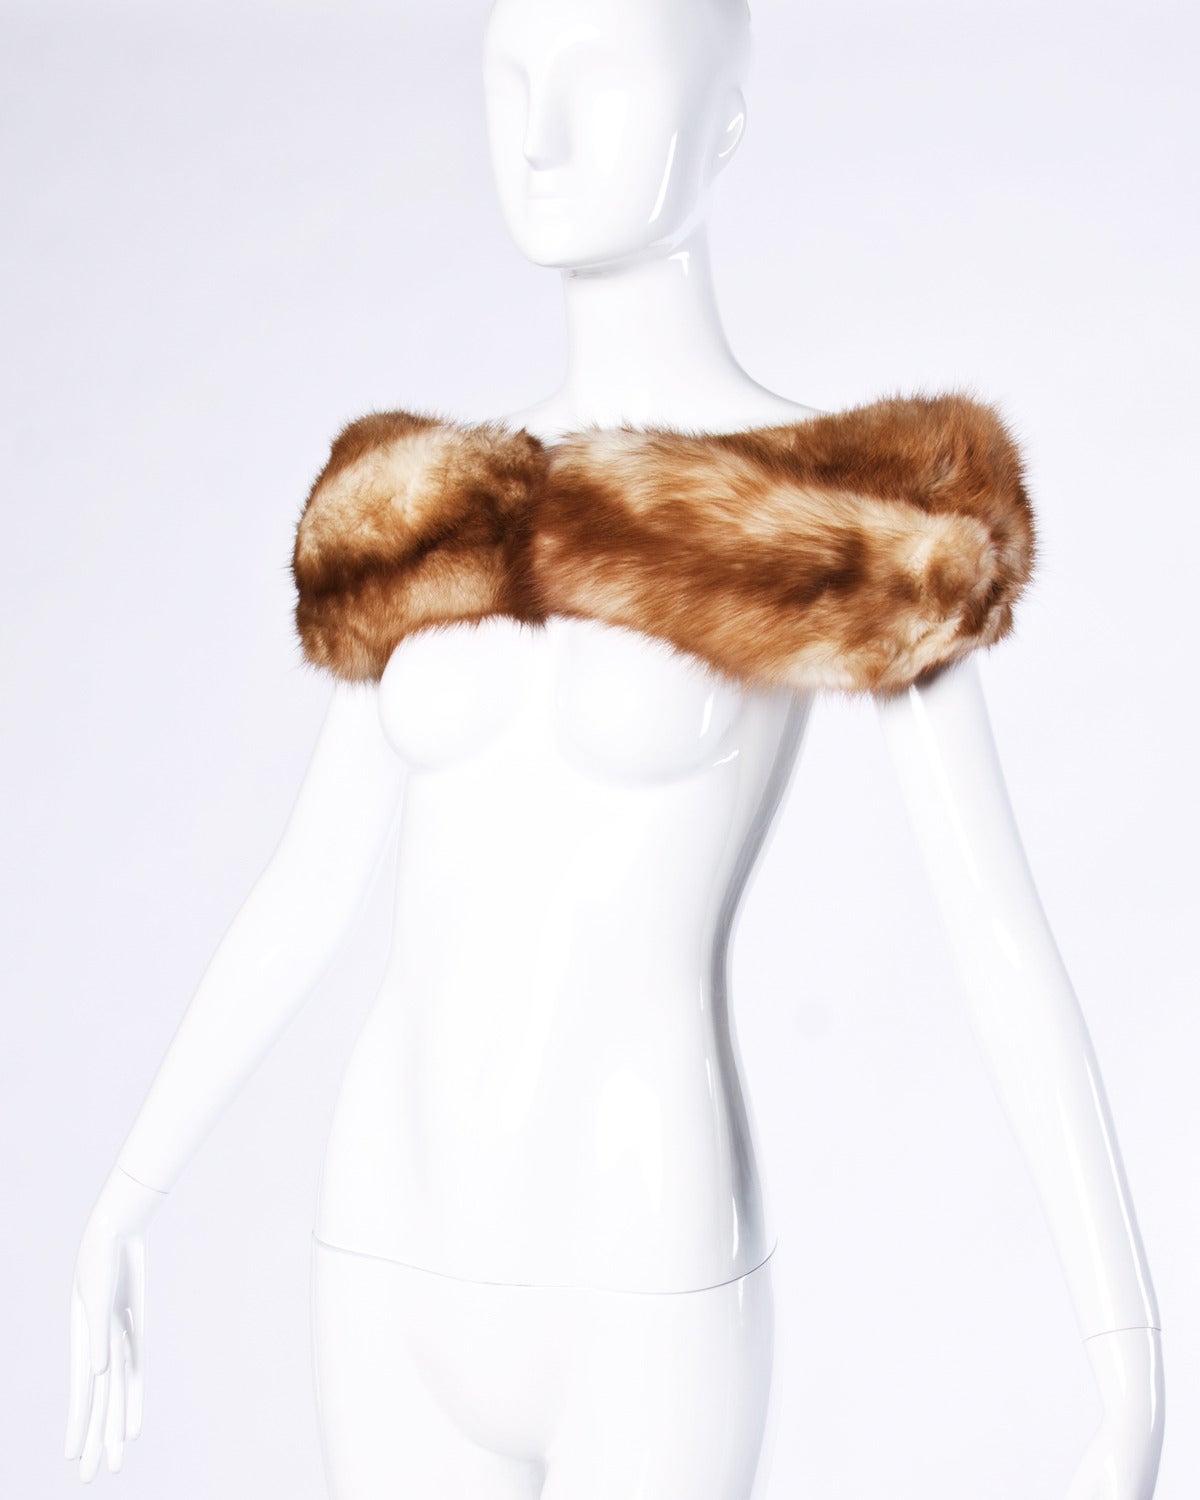 Vintage Stone Marten fur shoulder wrap or stole. This piece can be worn many different ways! Long luxurious guard hairs and ultra soft fur.

Details:

Fully Lined
Hook Closure
Color: Ivory/ Brown
Fabric: Genuine Stone Marten Fur
Label: